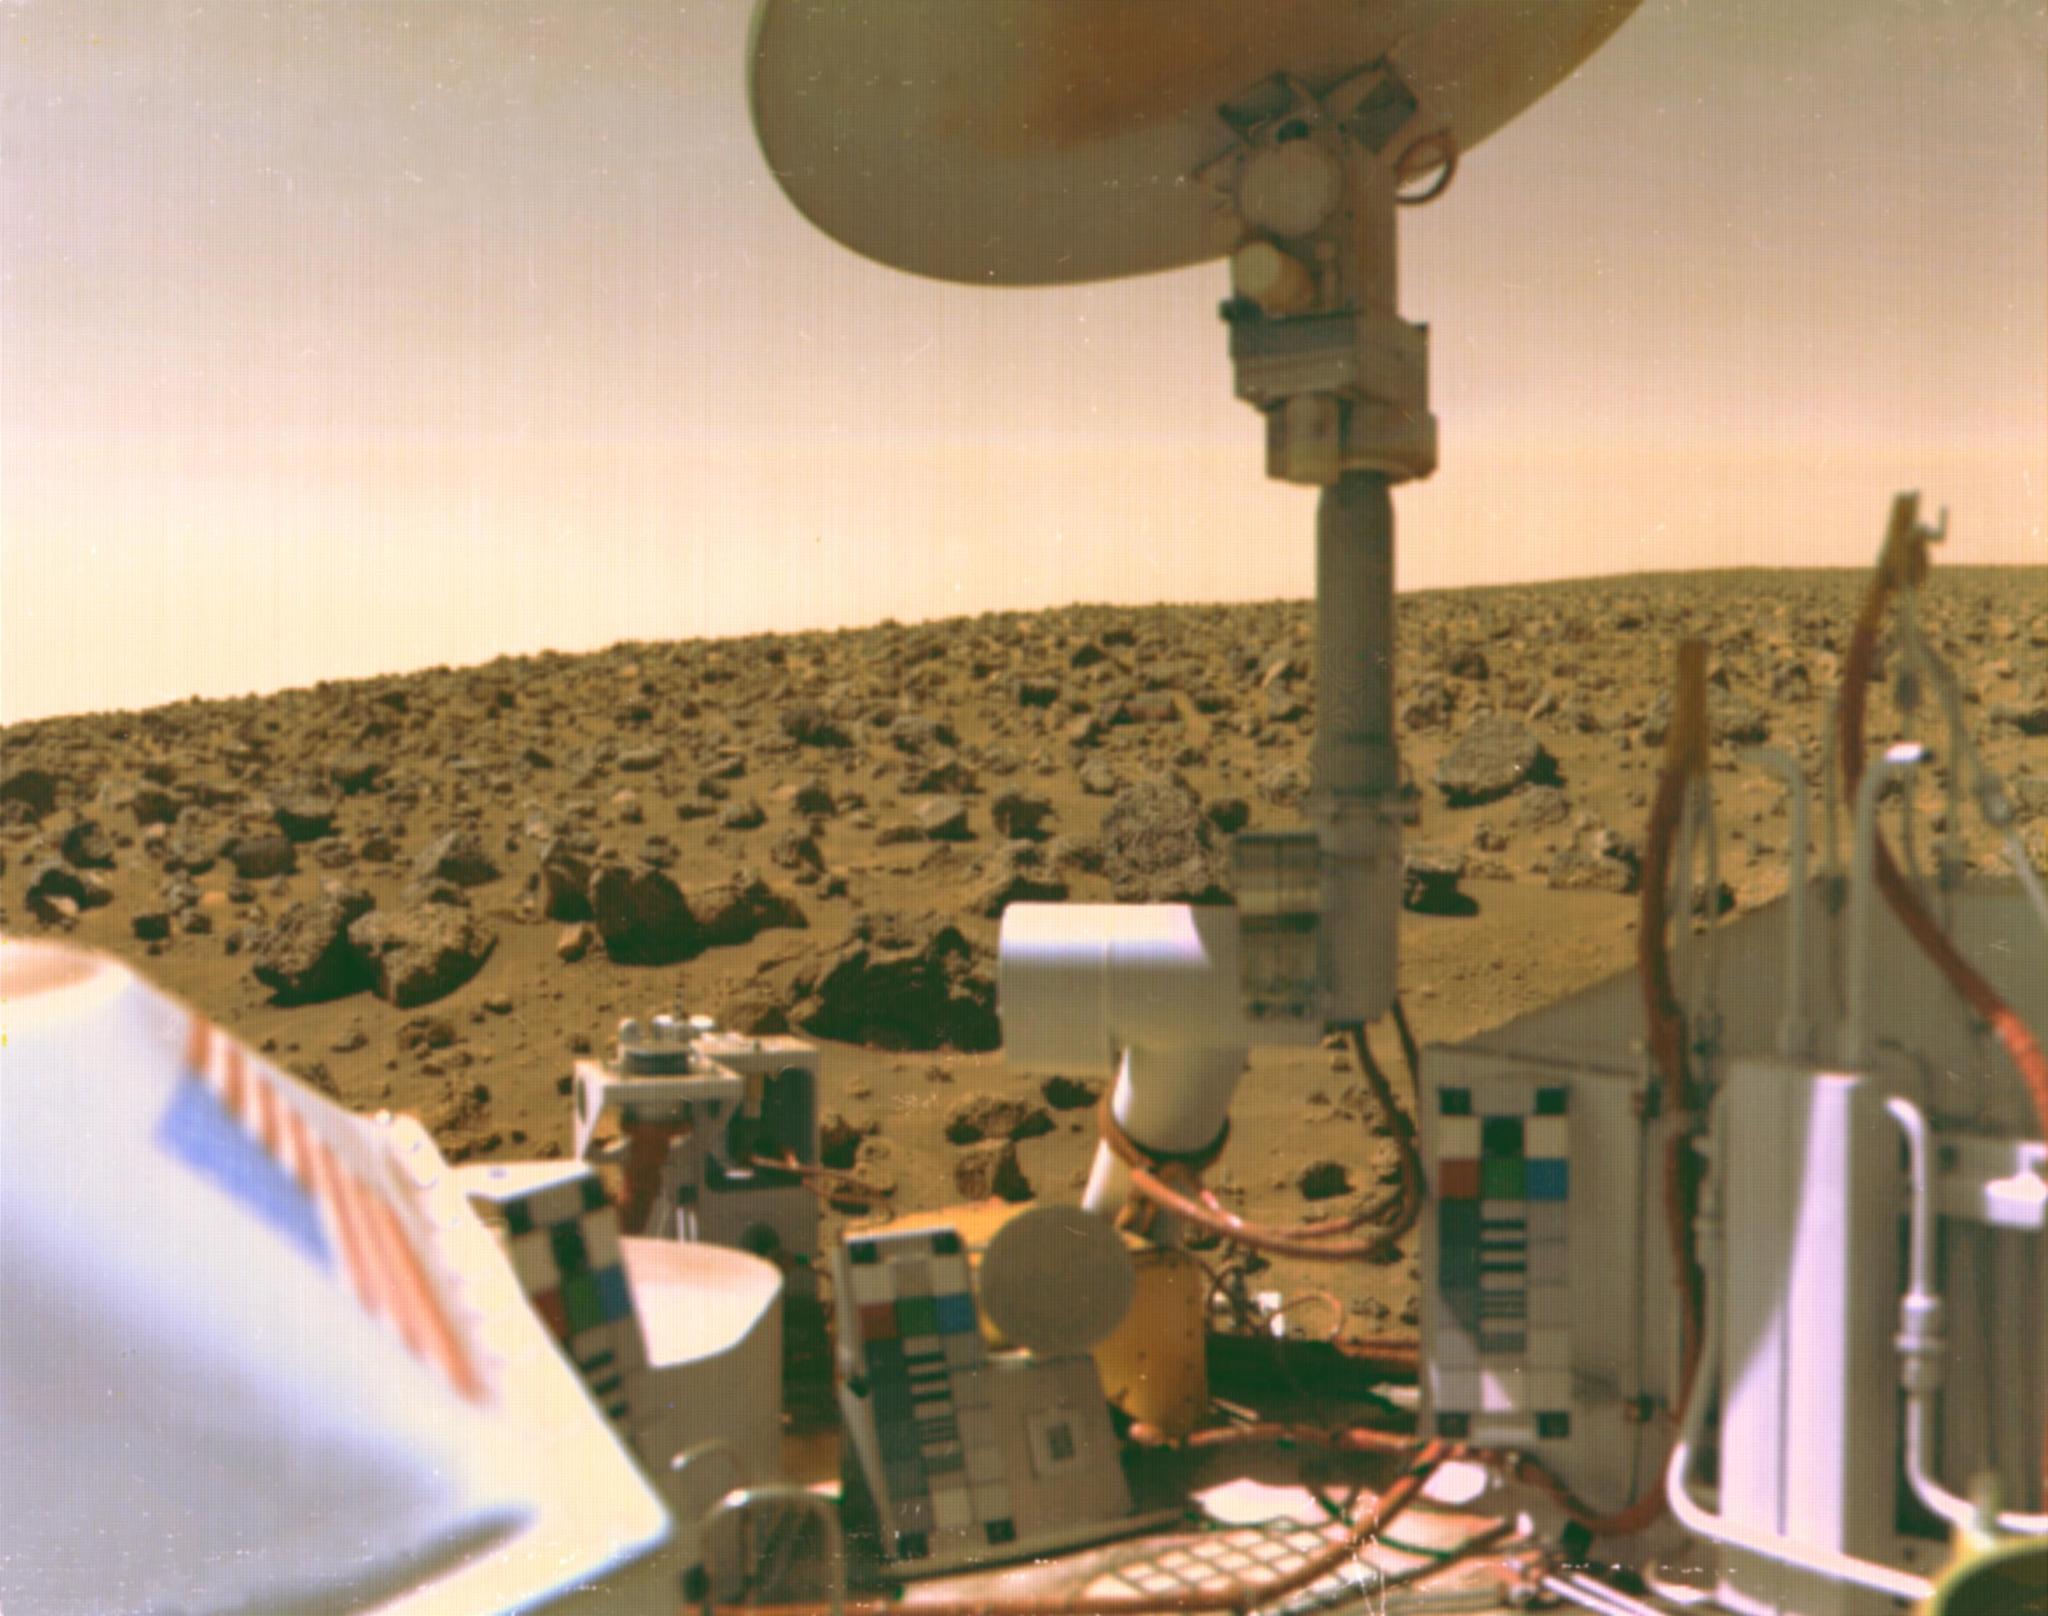 This is a photo from surface of Mars as seen from the Viking 2 lander.